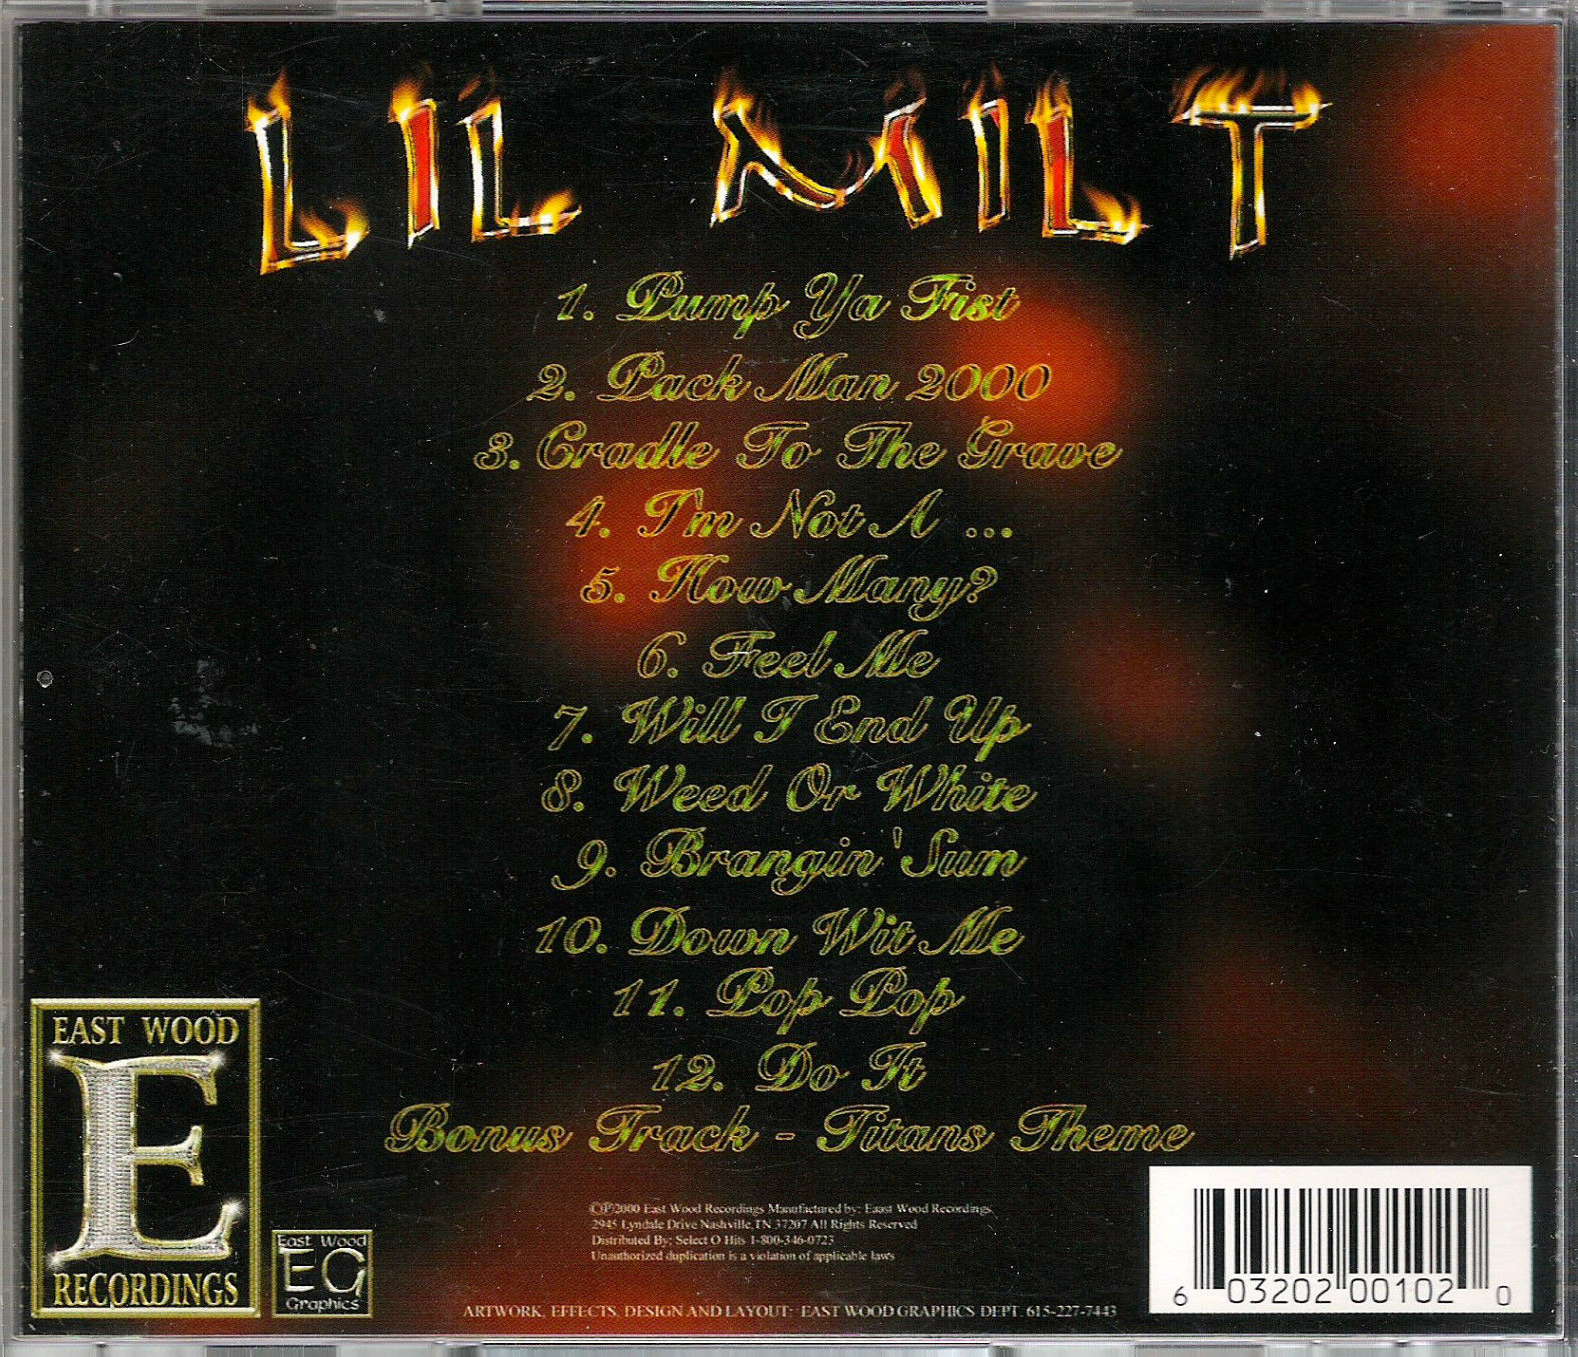 Lil Milt (East Wood Recordings, East Wood Records) in Nashville 